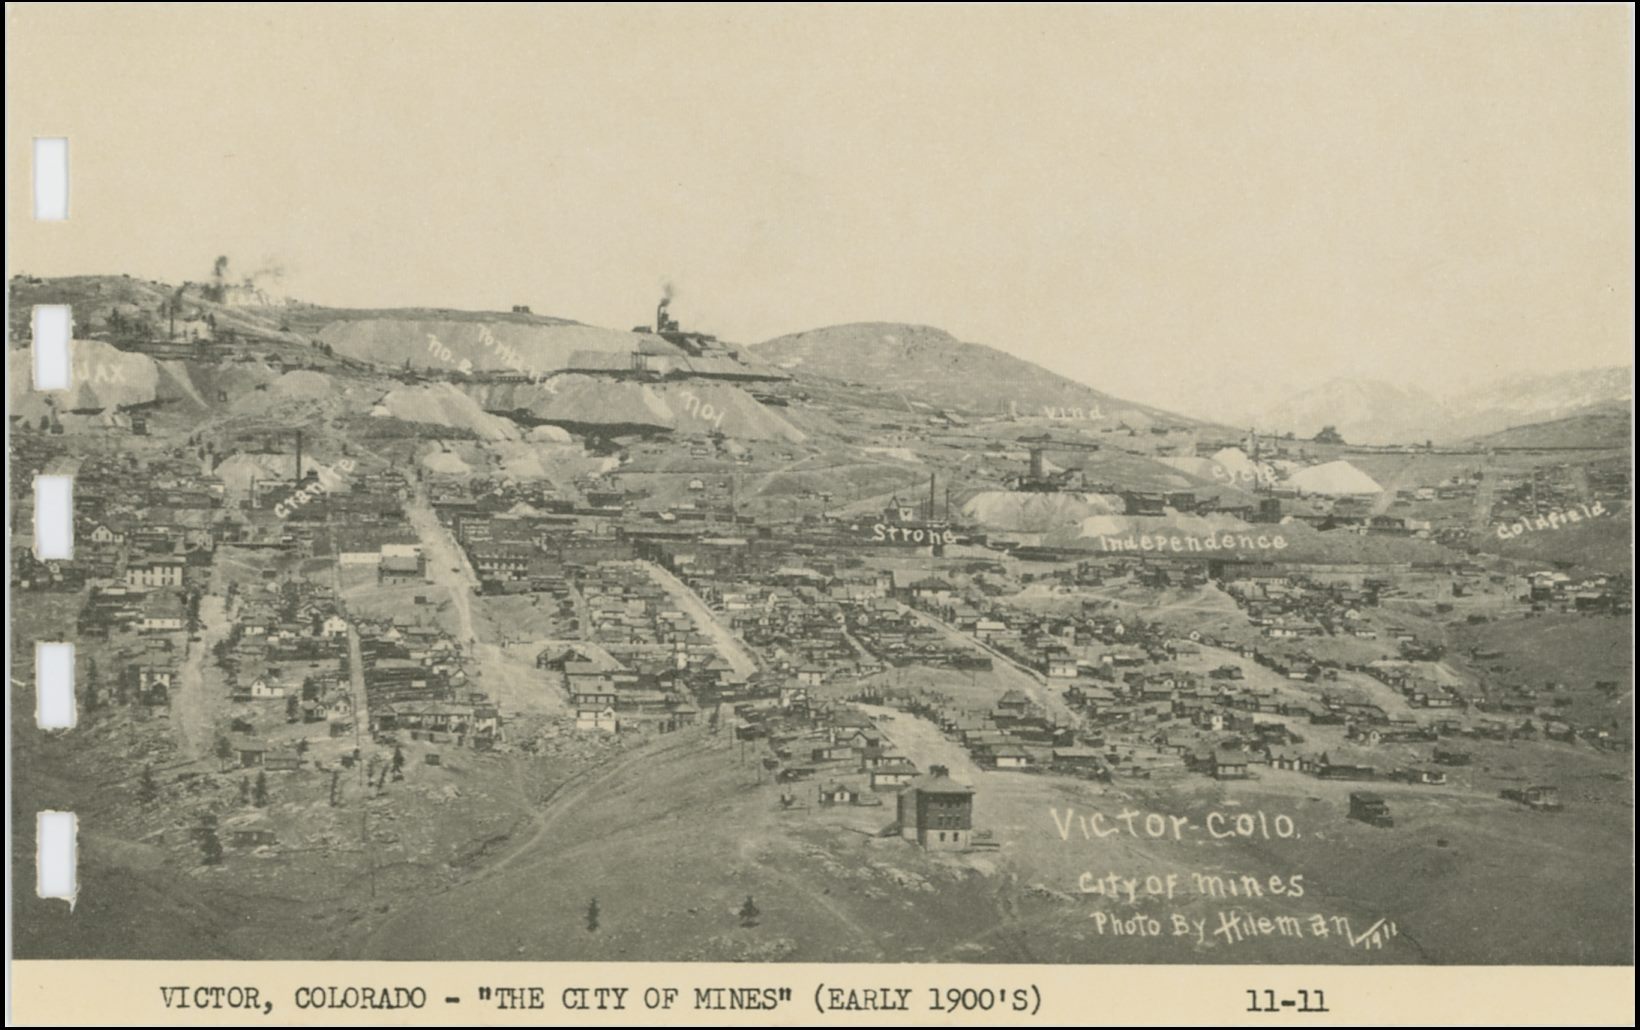 This view of Victor is looking north from Straub Mountain area. Photographed in 1911 by the Hileman as the view is credited to. Being this is from a printed card in a small more modern postcard folder it is not the greatest quality, but one gets an idea of the town and the many mines in and around it. In addition, in this view they are marked out, even if there is at least one error in that marking.
* In upper left quadrangle is the Portland No. 1 & No. 2 marked out, but the location of the No. 2 shaft of the Portland is NOT where this image gives it! Portland No. 2 shaft is in this view above the No. 1 shaft, seen a little left of the center of this view sideways. No. 2 Shaft of Portland is seen against the sky with No. 1 just below it, with the huge dumps where No.1 is written. The Granite, original shaft, is located where this card has written the No.2 text.
* Just behind and left of the huge smokestack of the Gold Coin shaft, marked in this view as Granite, is the main shaft of the Dead Pine. The dump is much easier seen then the mine itself.